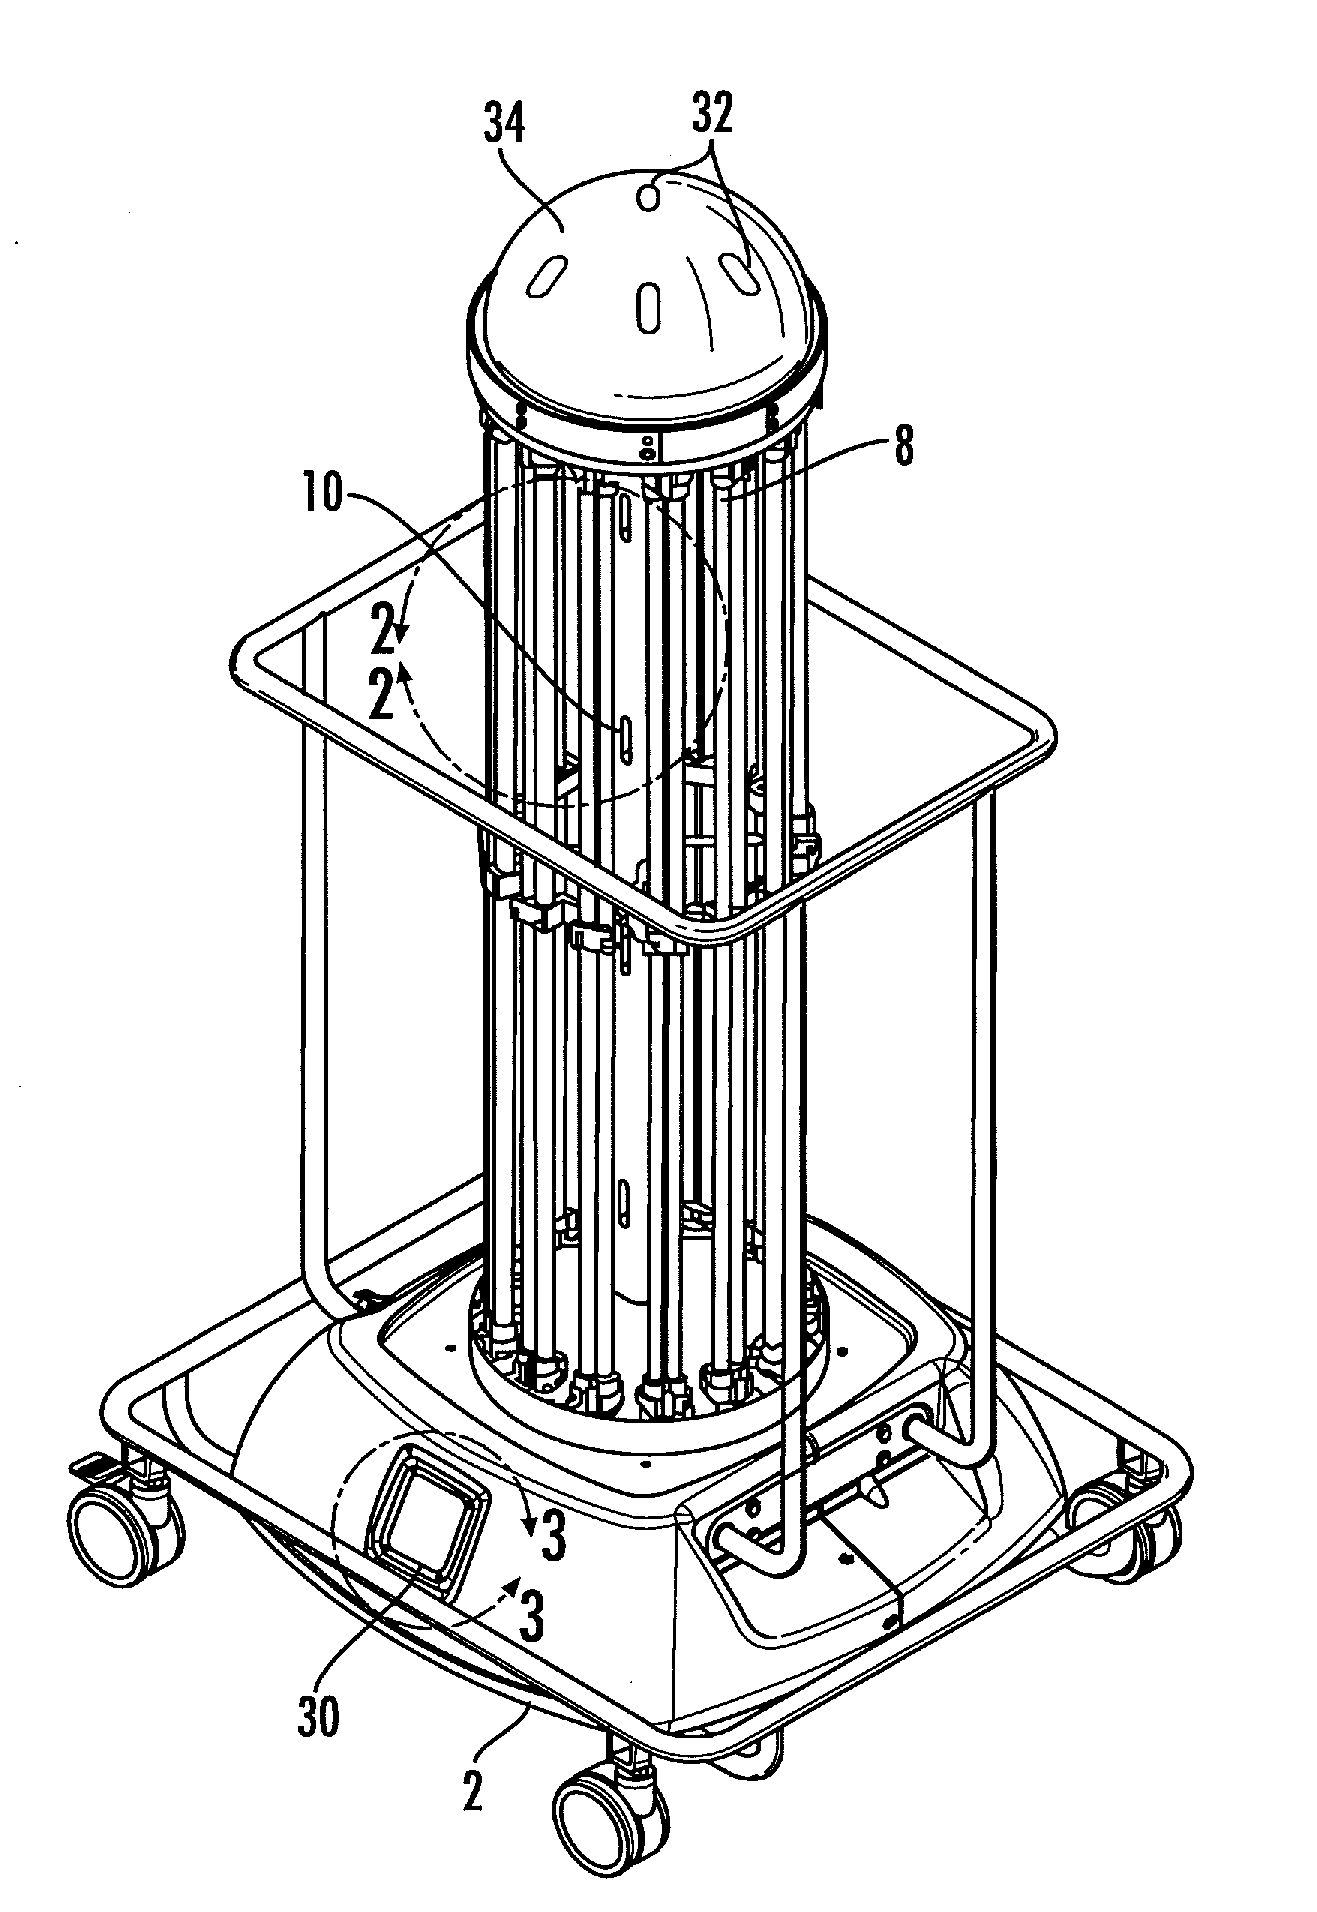 Organism control device and method